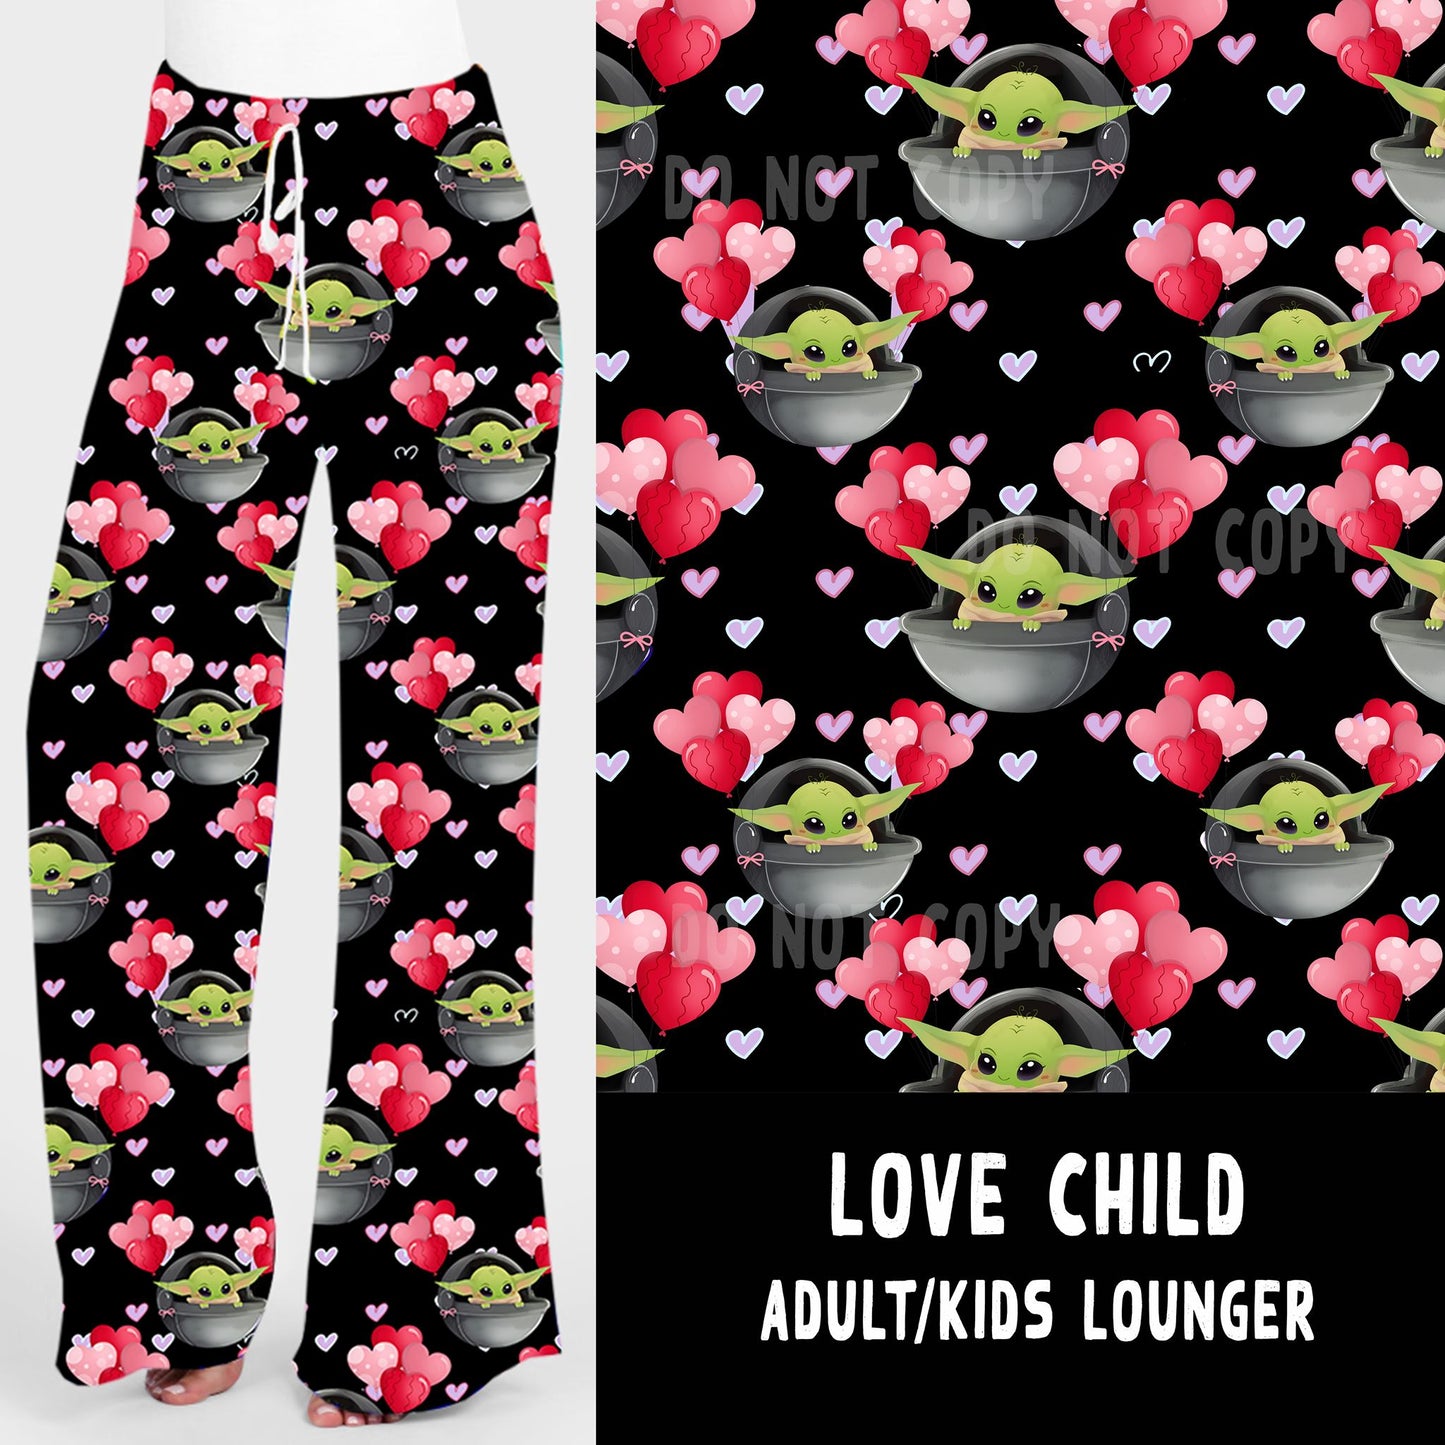 LUCKY IN LOVE-LOVE CHILD UNISEX ADULT/KIDS LOUNGER